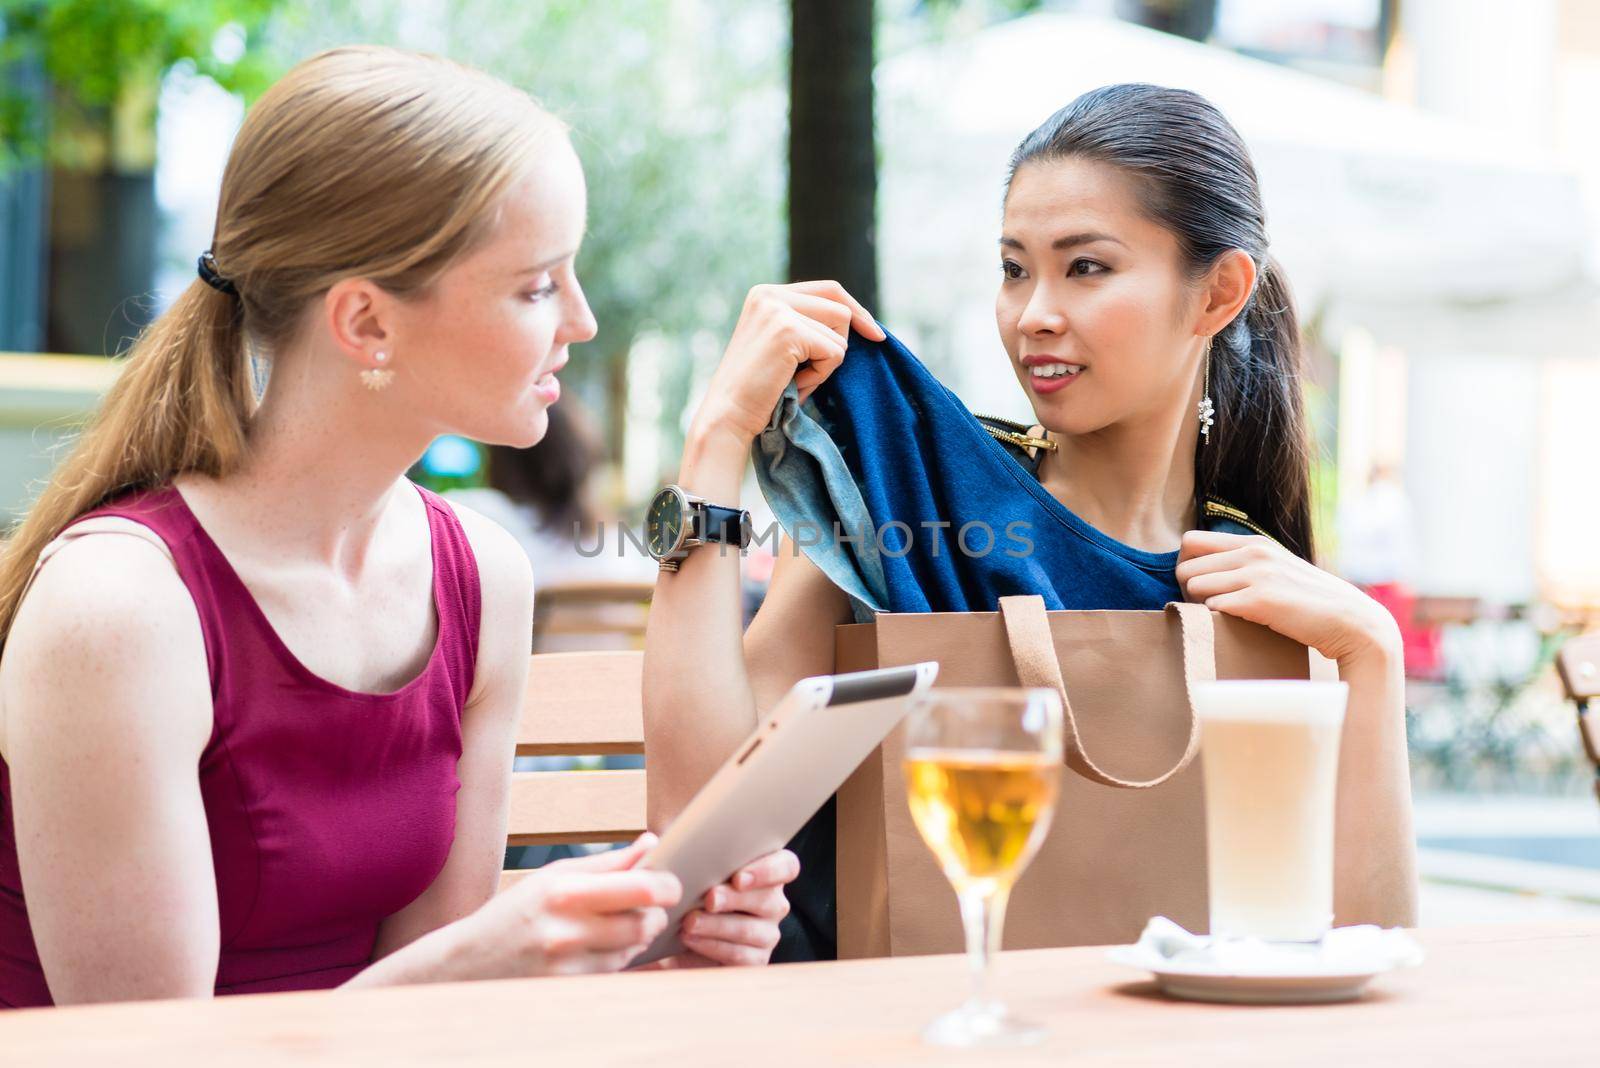 Two young women discussing a clothing purchase as they sit at a restaurant table ordering a meal as an attractive Asian women pulls it from the bag.